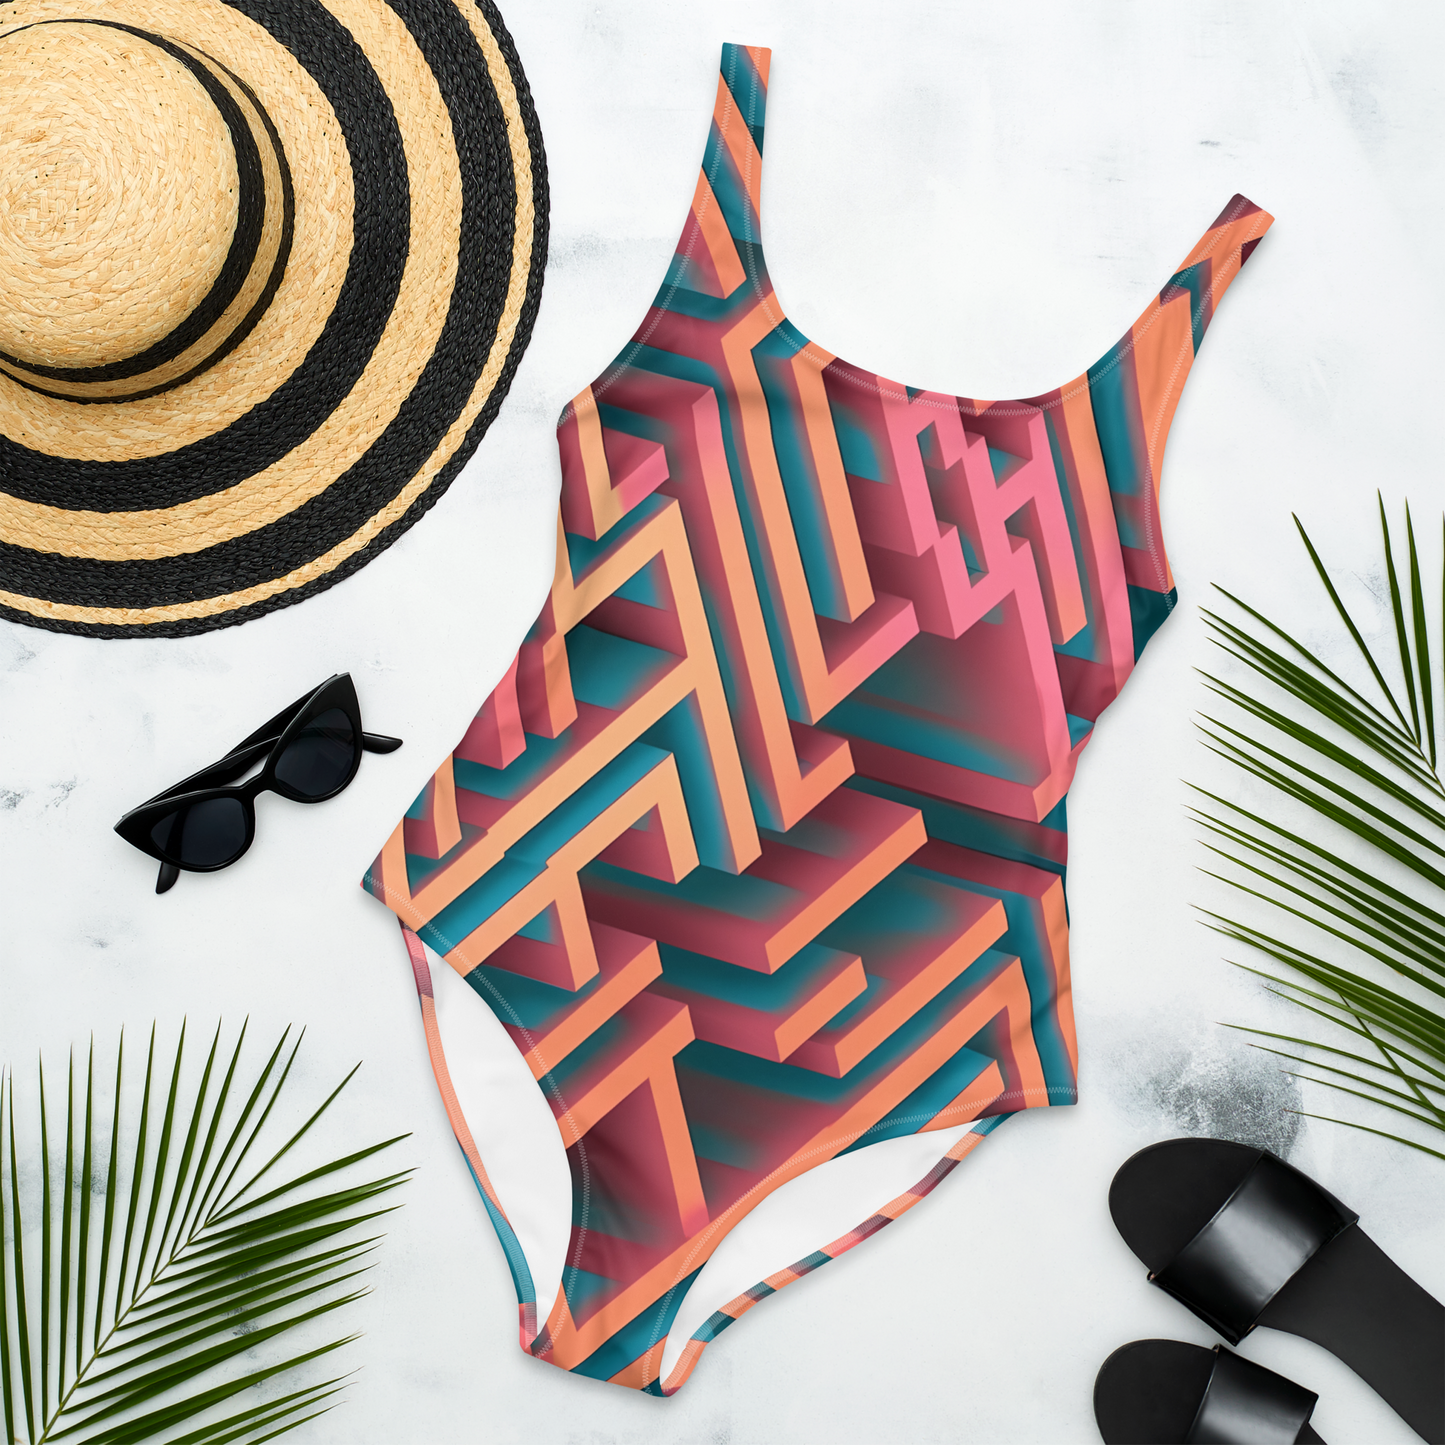 3D Maze Illusion | 3D Patterns | All-Over Print One-Piece Swimsuit - #1